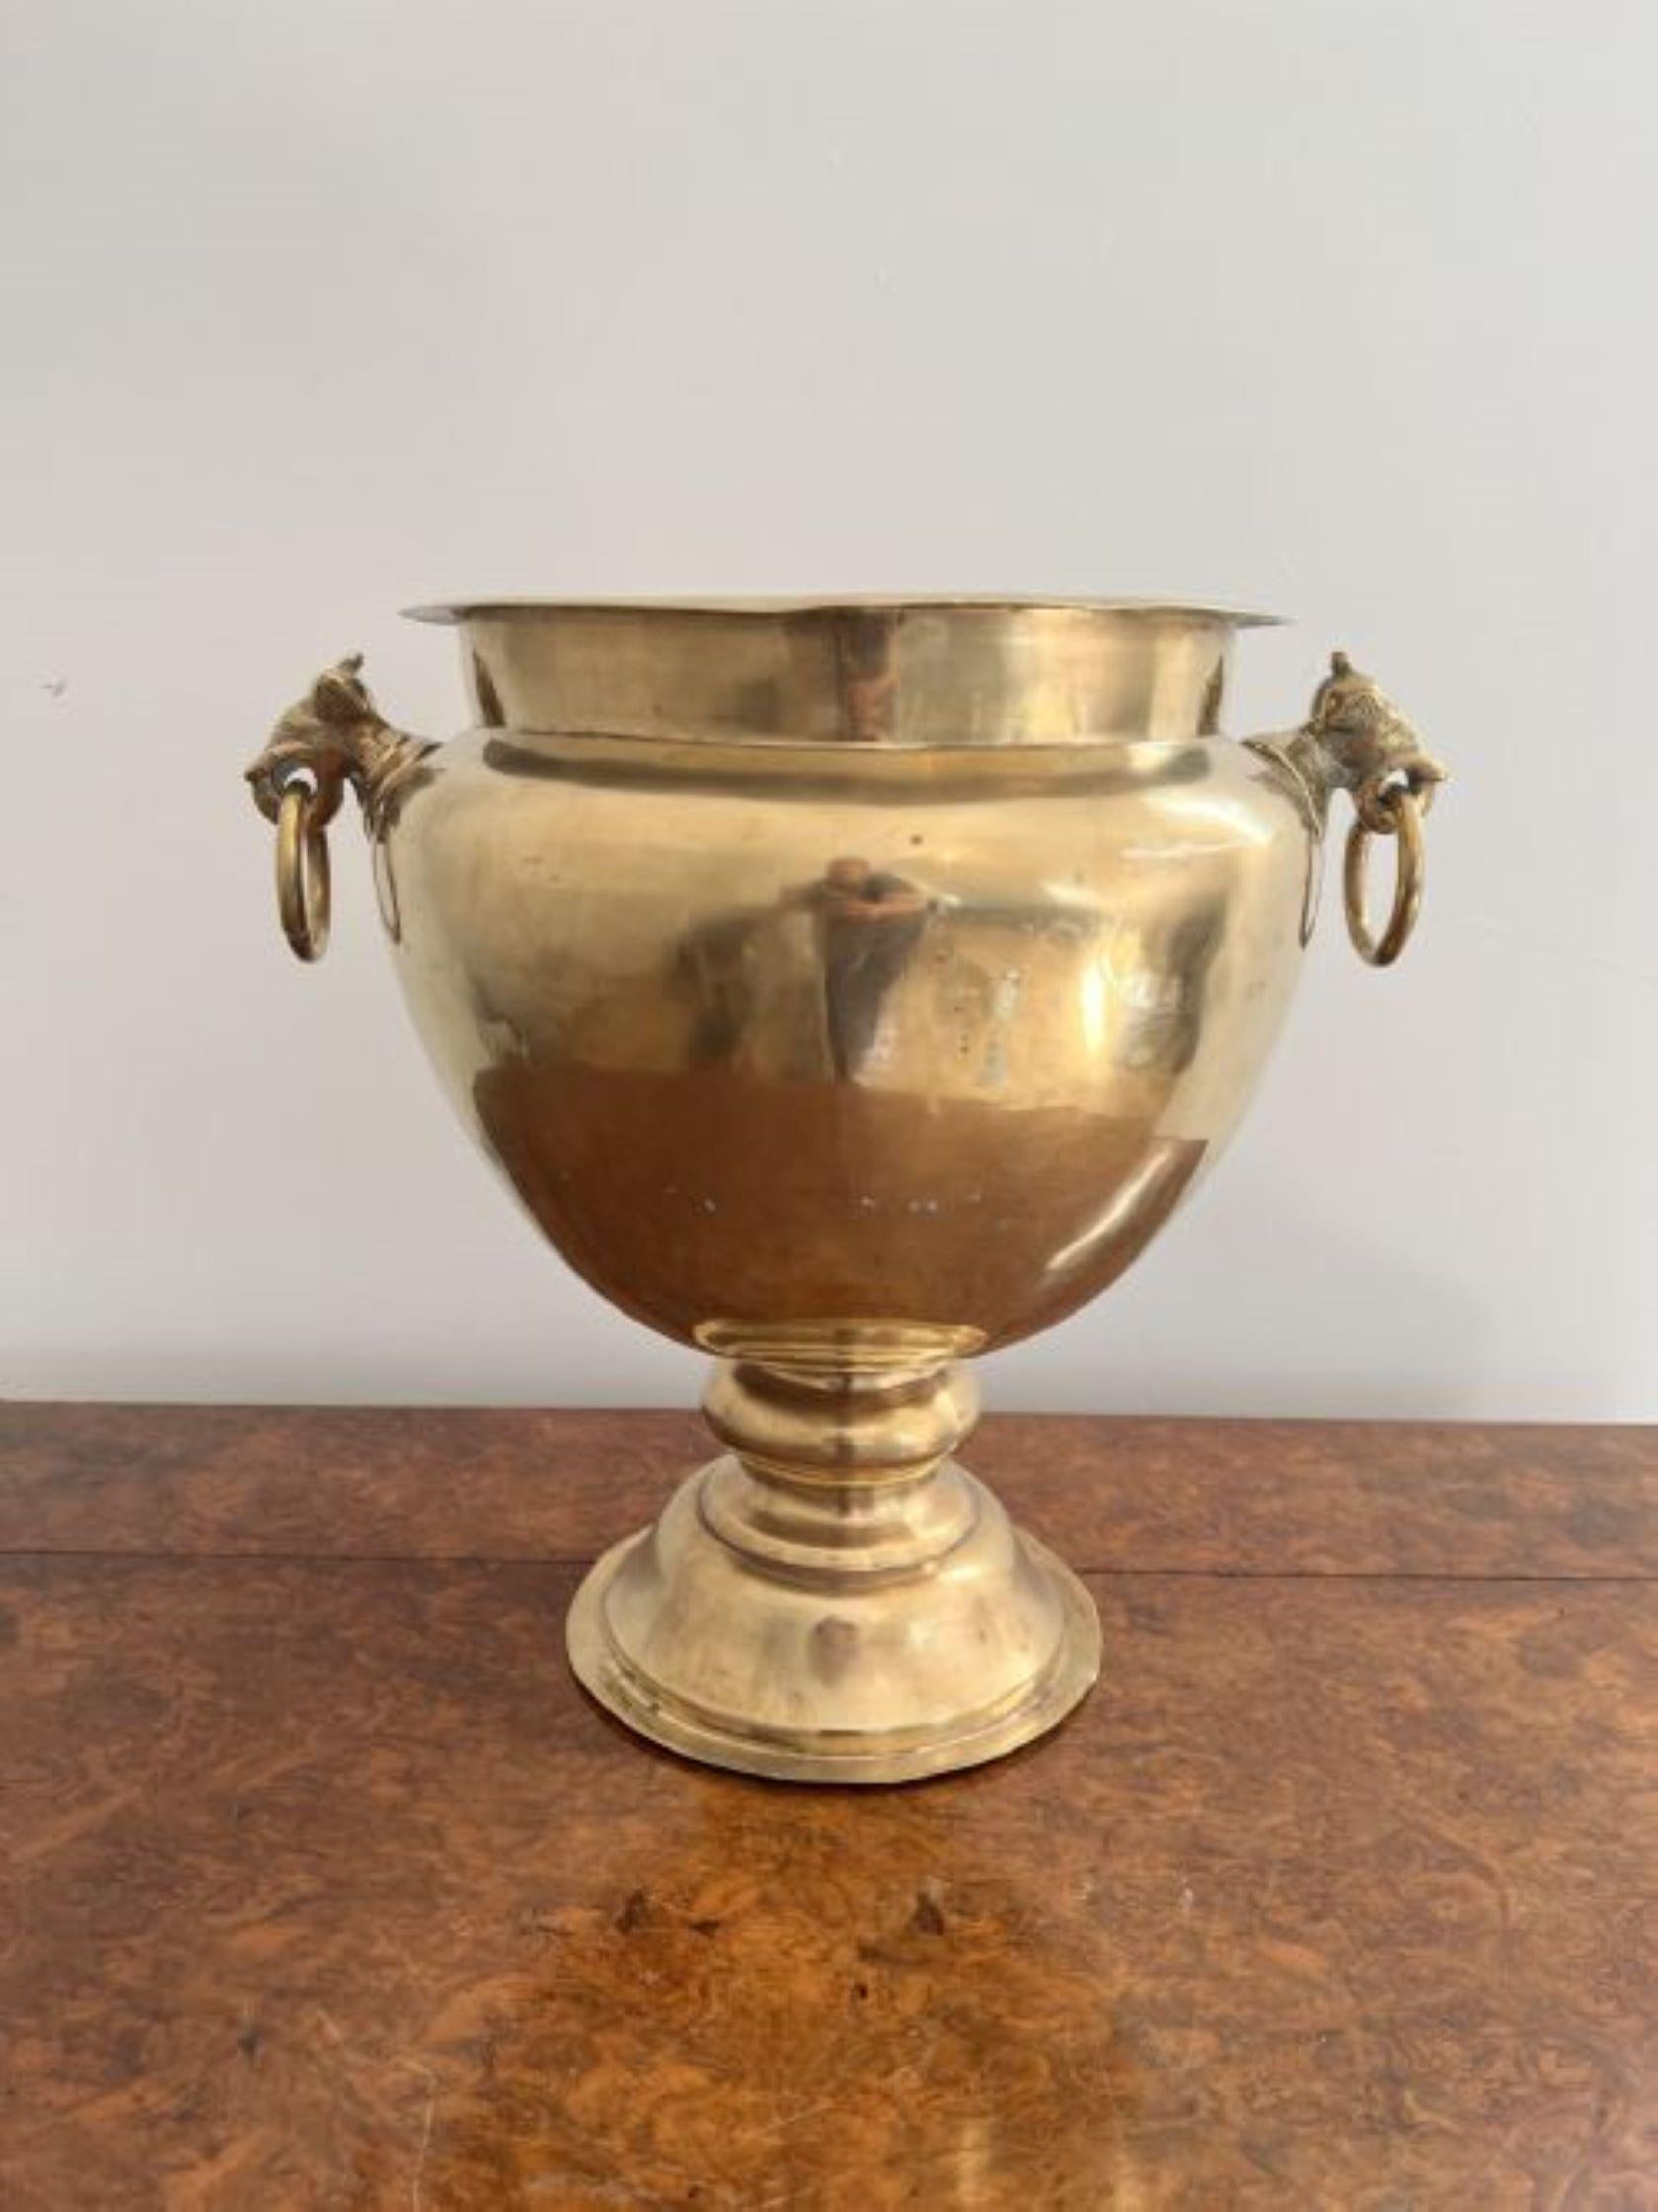 Lovely quality antique Victorian brass champagne bucket on a stand having a superb quality antique Victorian champagne bucket on a stand with a circular brass champagne bucket with lion heads ring handles to both sides, supported on a turned